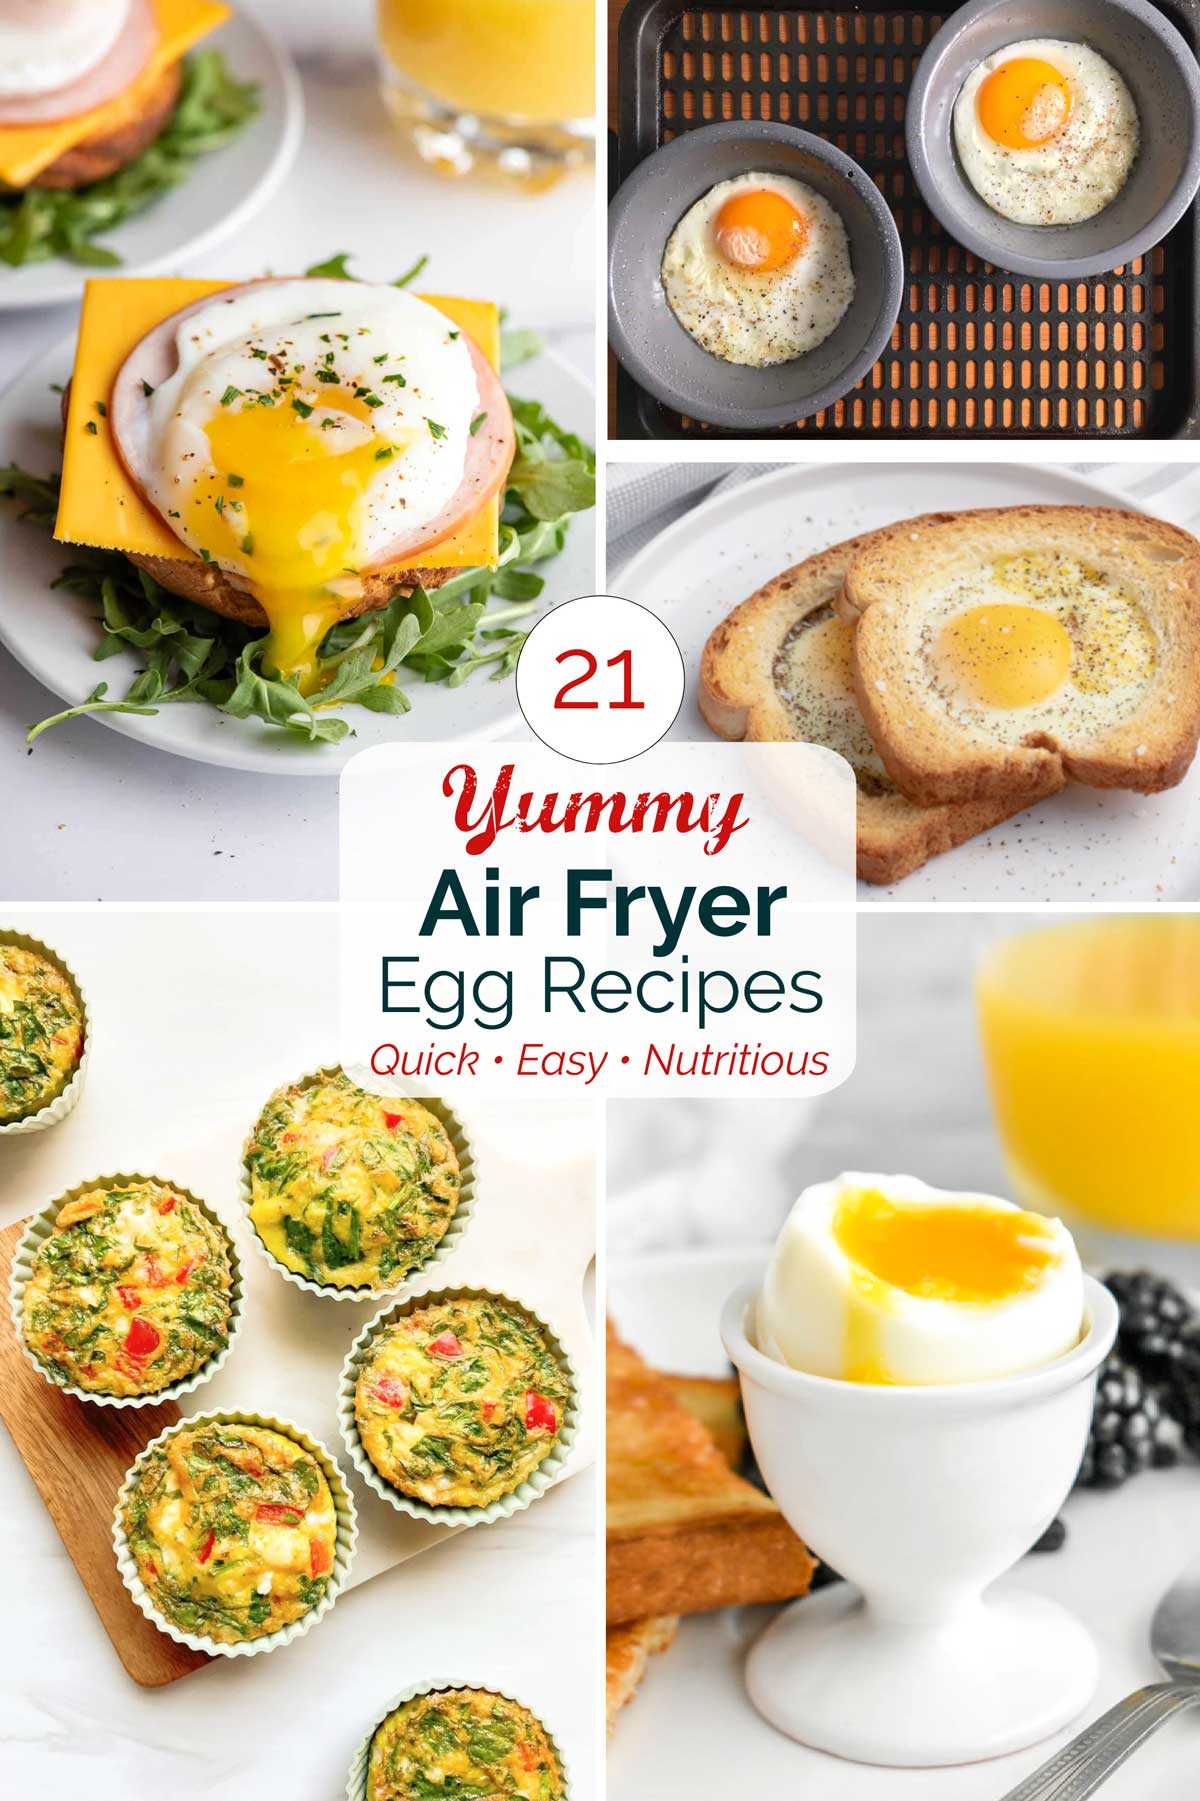 Collage of 5 recipe pictures with text overlay "21 Yummy Air Fryer Egg Recipes Quick • Easy • Nutritious".